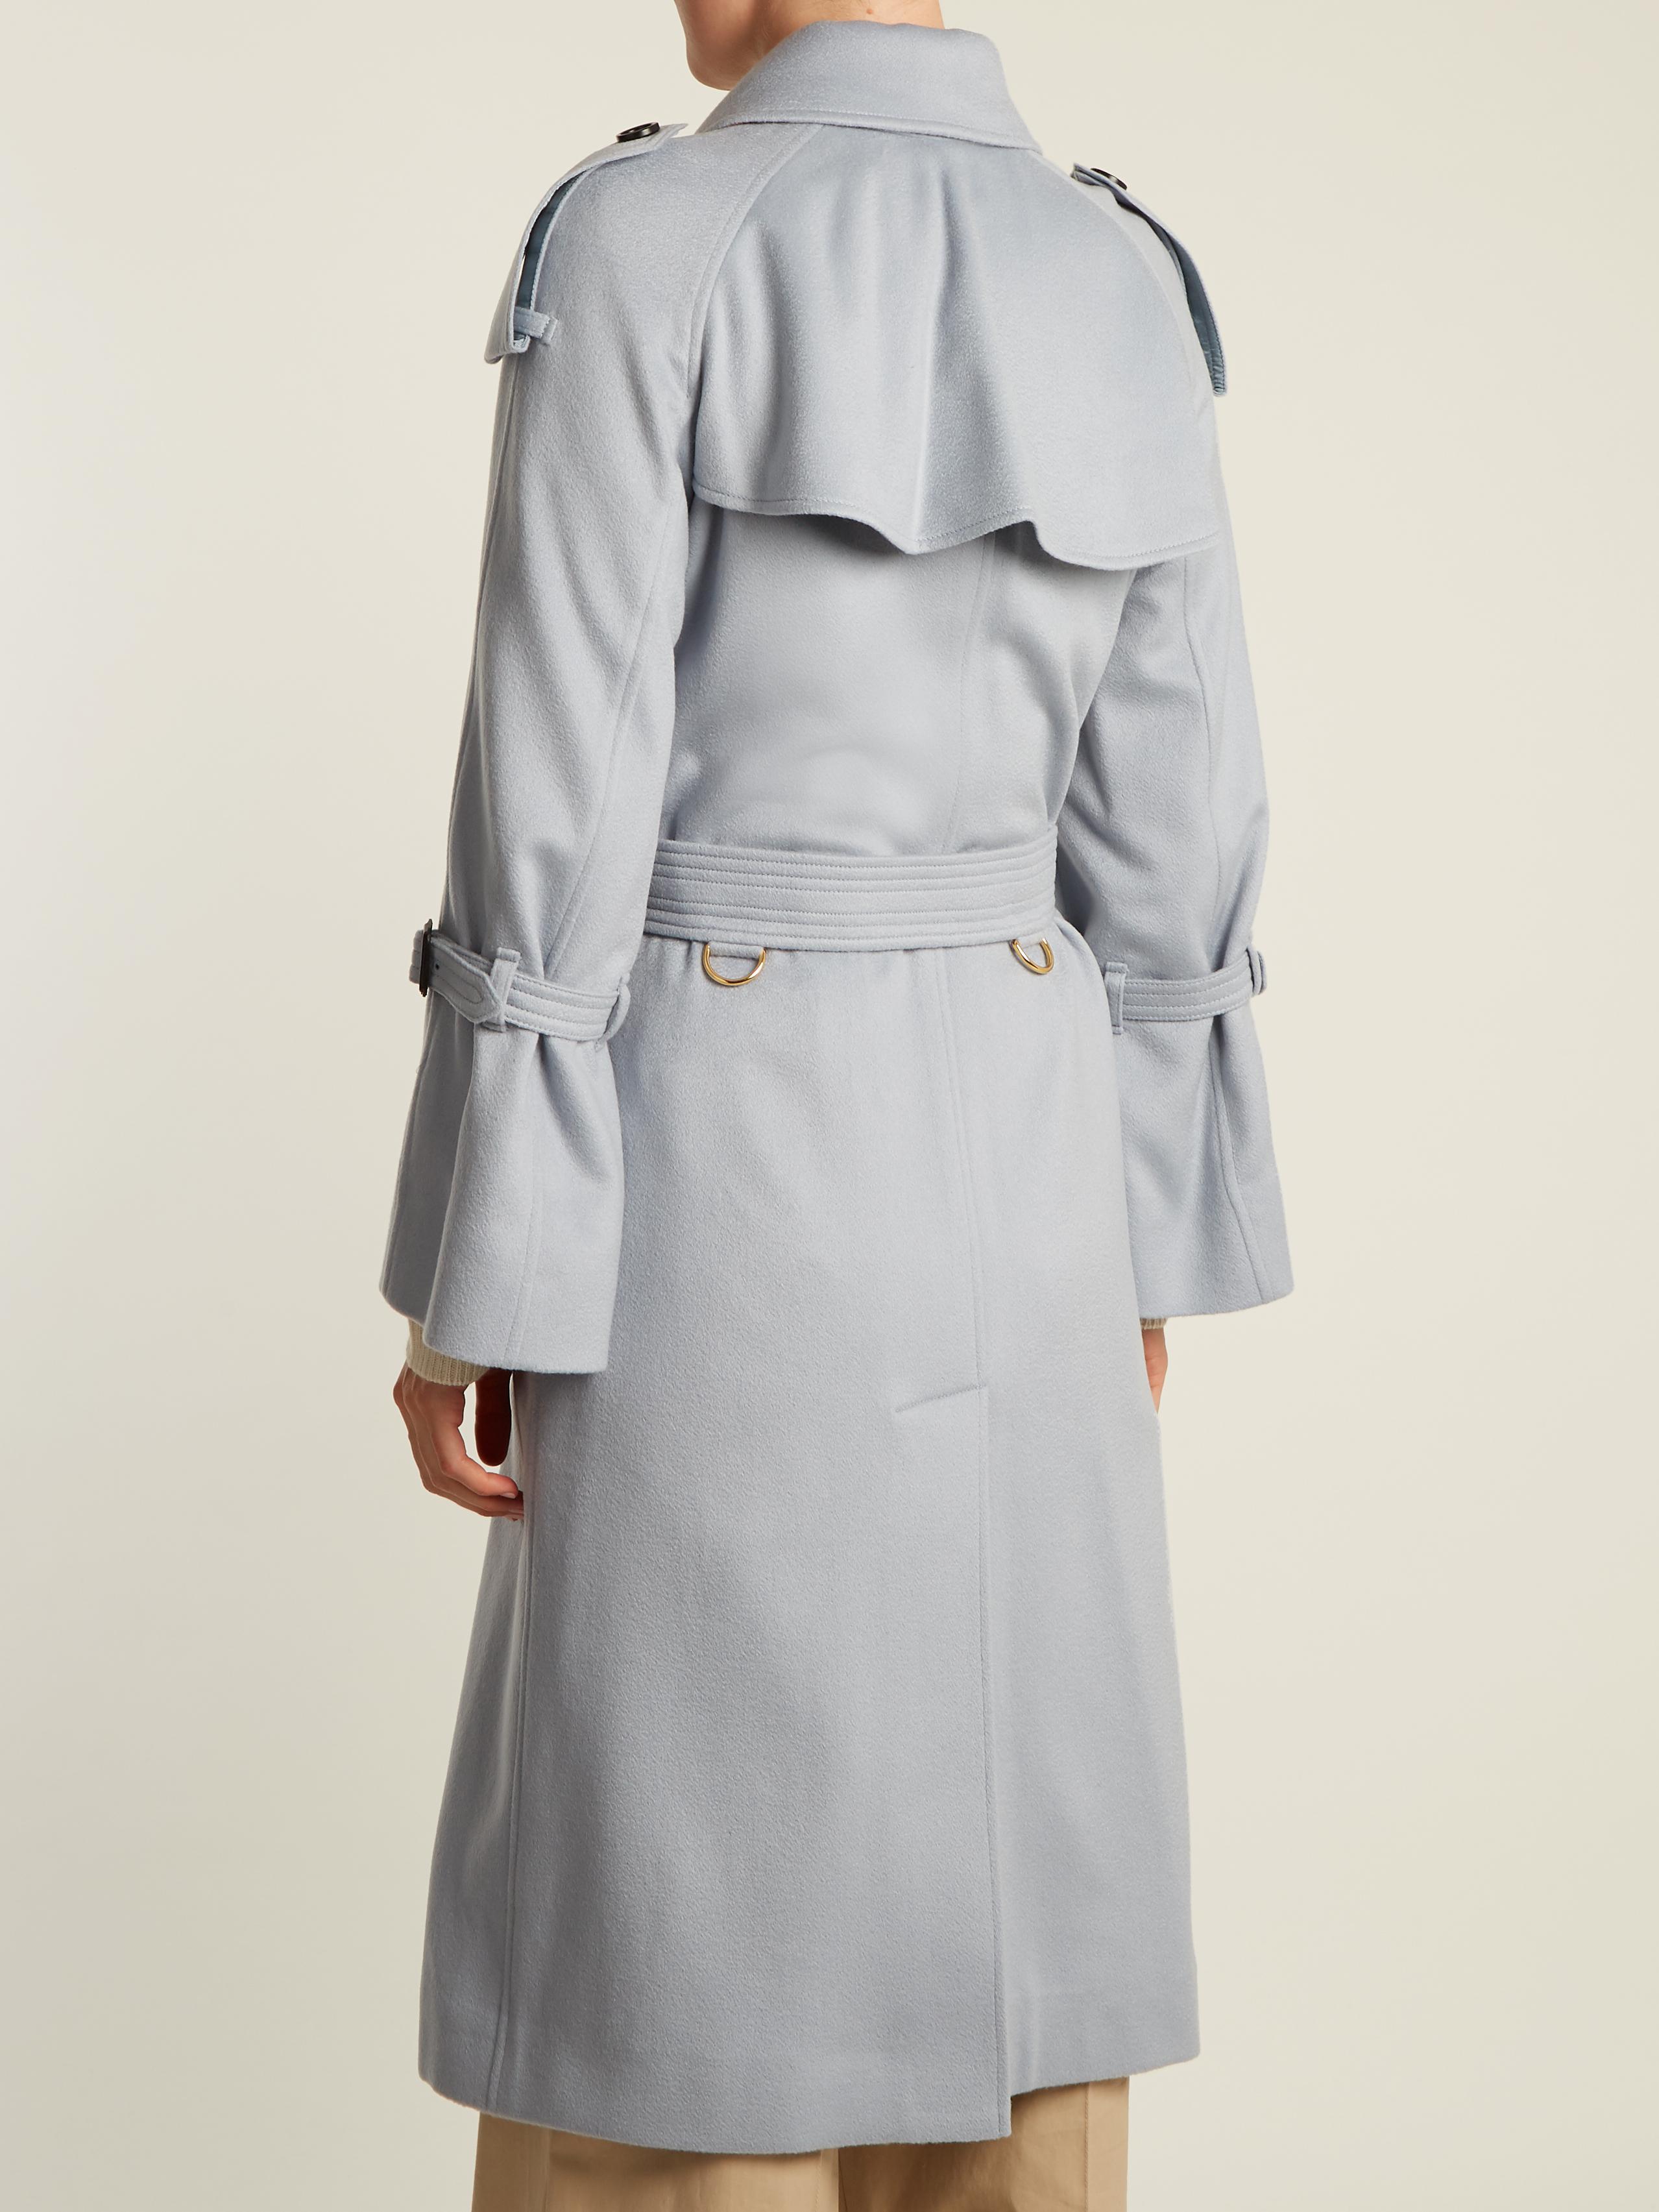 Burberry Lakestone Double-breasted Cashmere Trench Coat in Light 